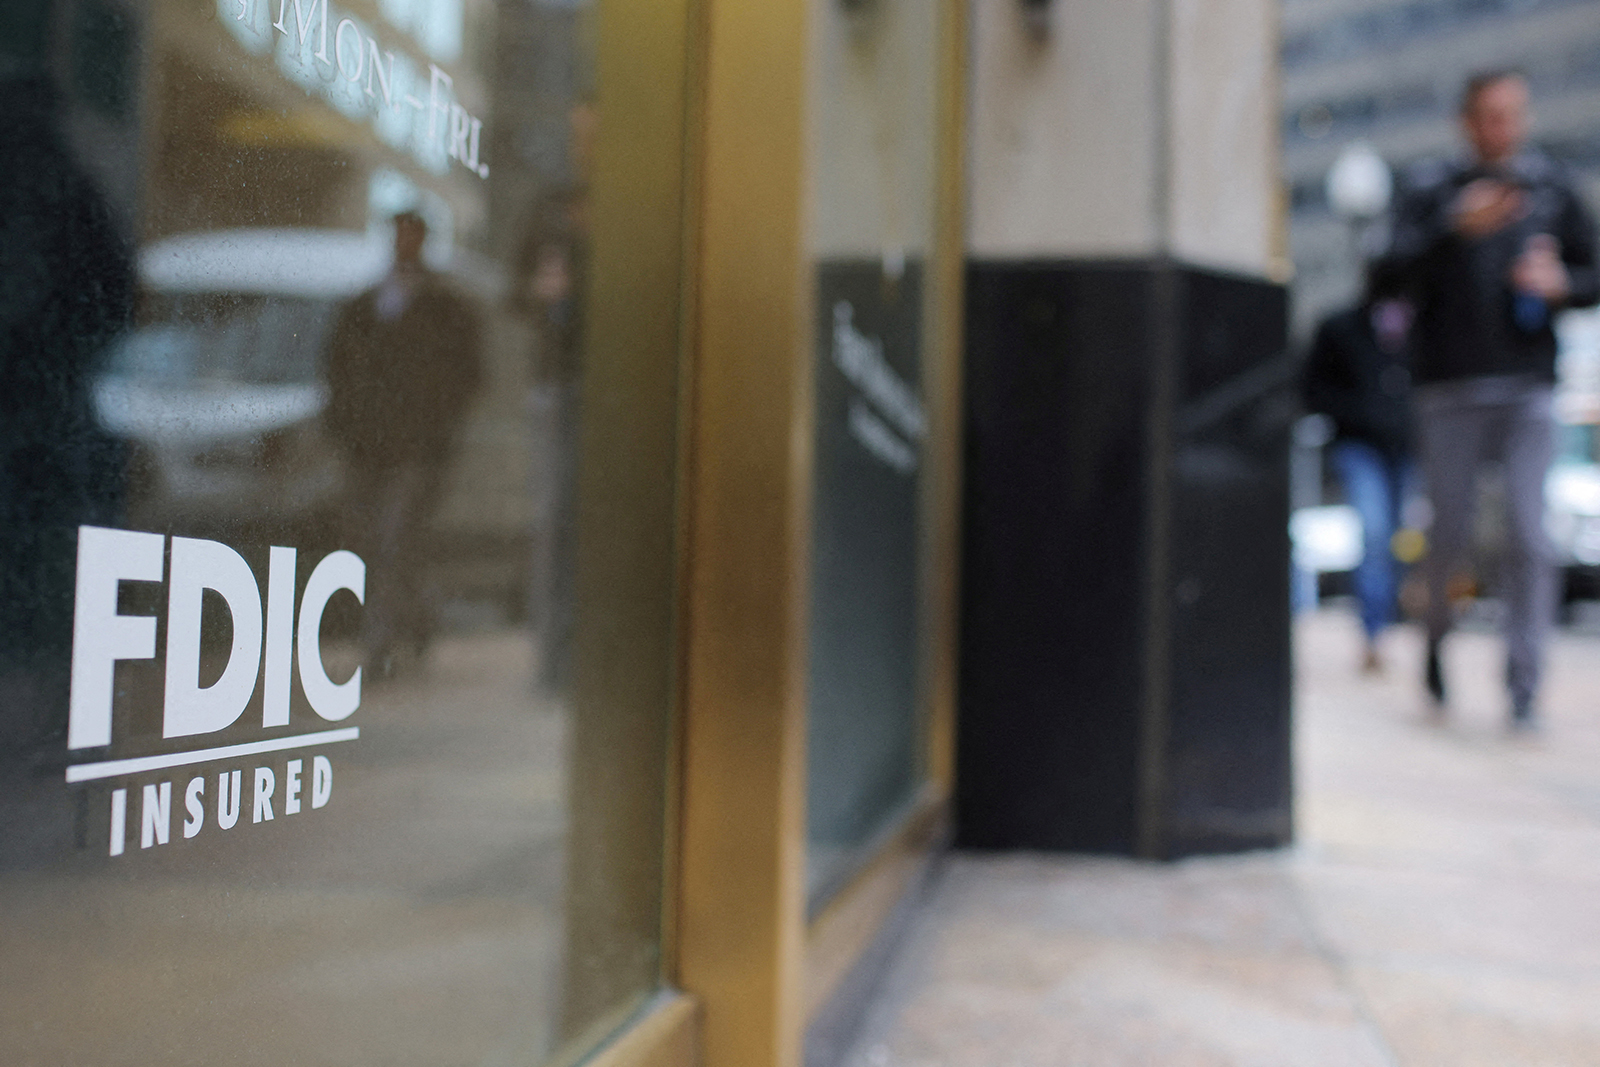 A sign reads "FDIC Insured" on the door of a branch of First Republic Bank in Boston, Massachusetts, on March 13.